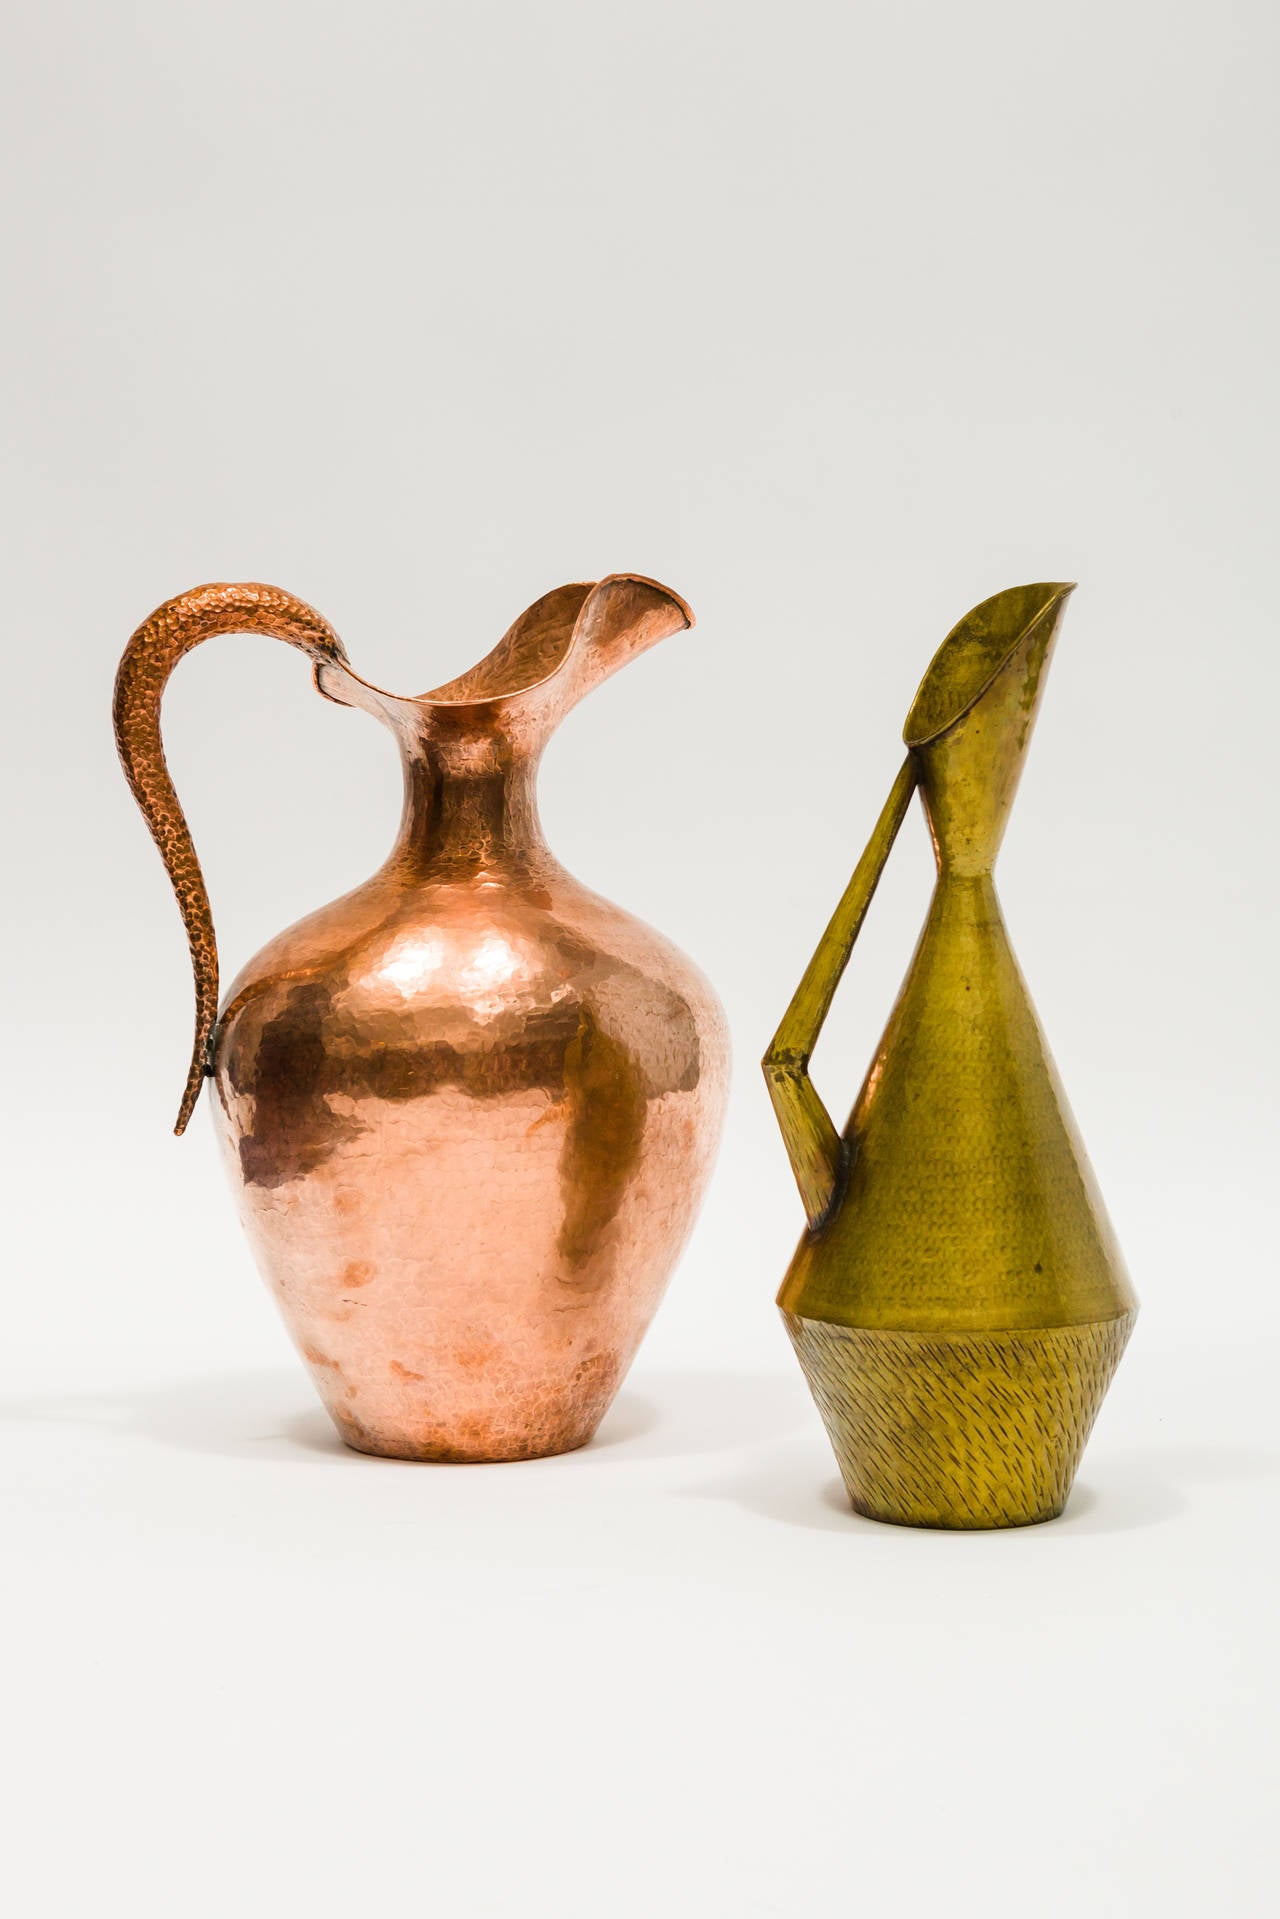 These hand hammered brass water pitcher from the early to mid 20th century were designed and formed by Egidio Casagrande in Italy.They have the Casagrande Borgo Trento Italia stamp on the bottom.
Priced for the pair.
Brass pitcher: 5.5